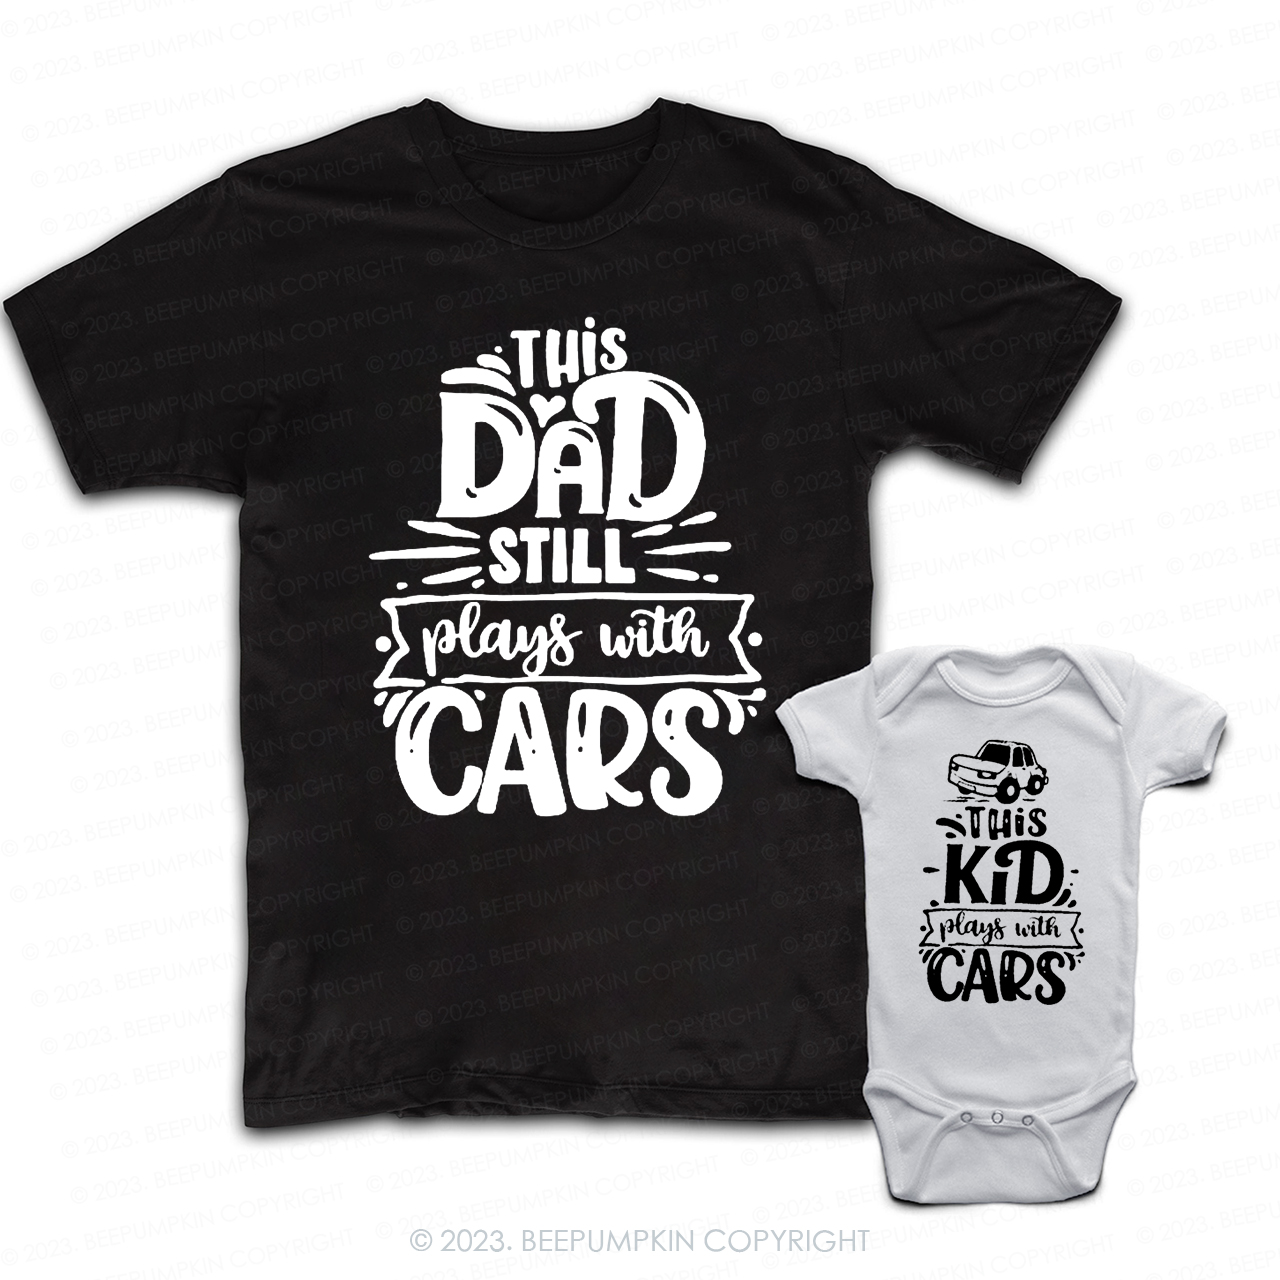 Play With Cars Dad & Me Matching T-Shirts 